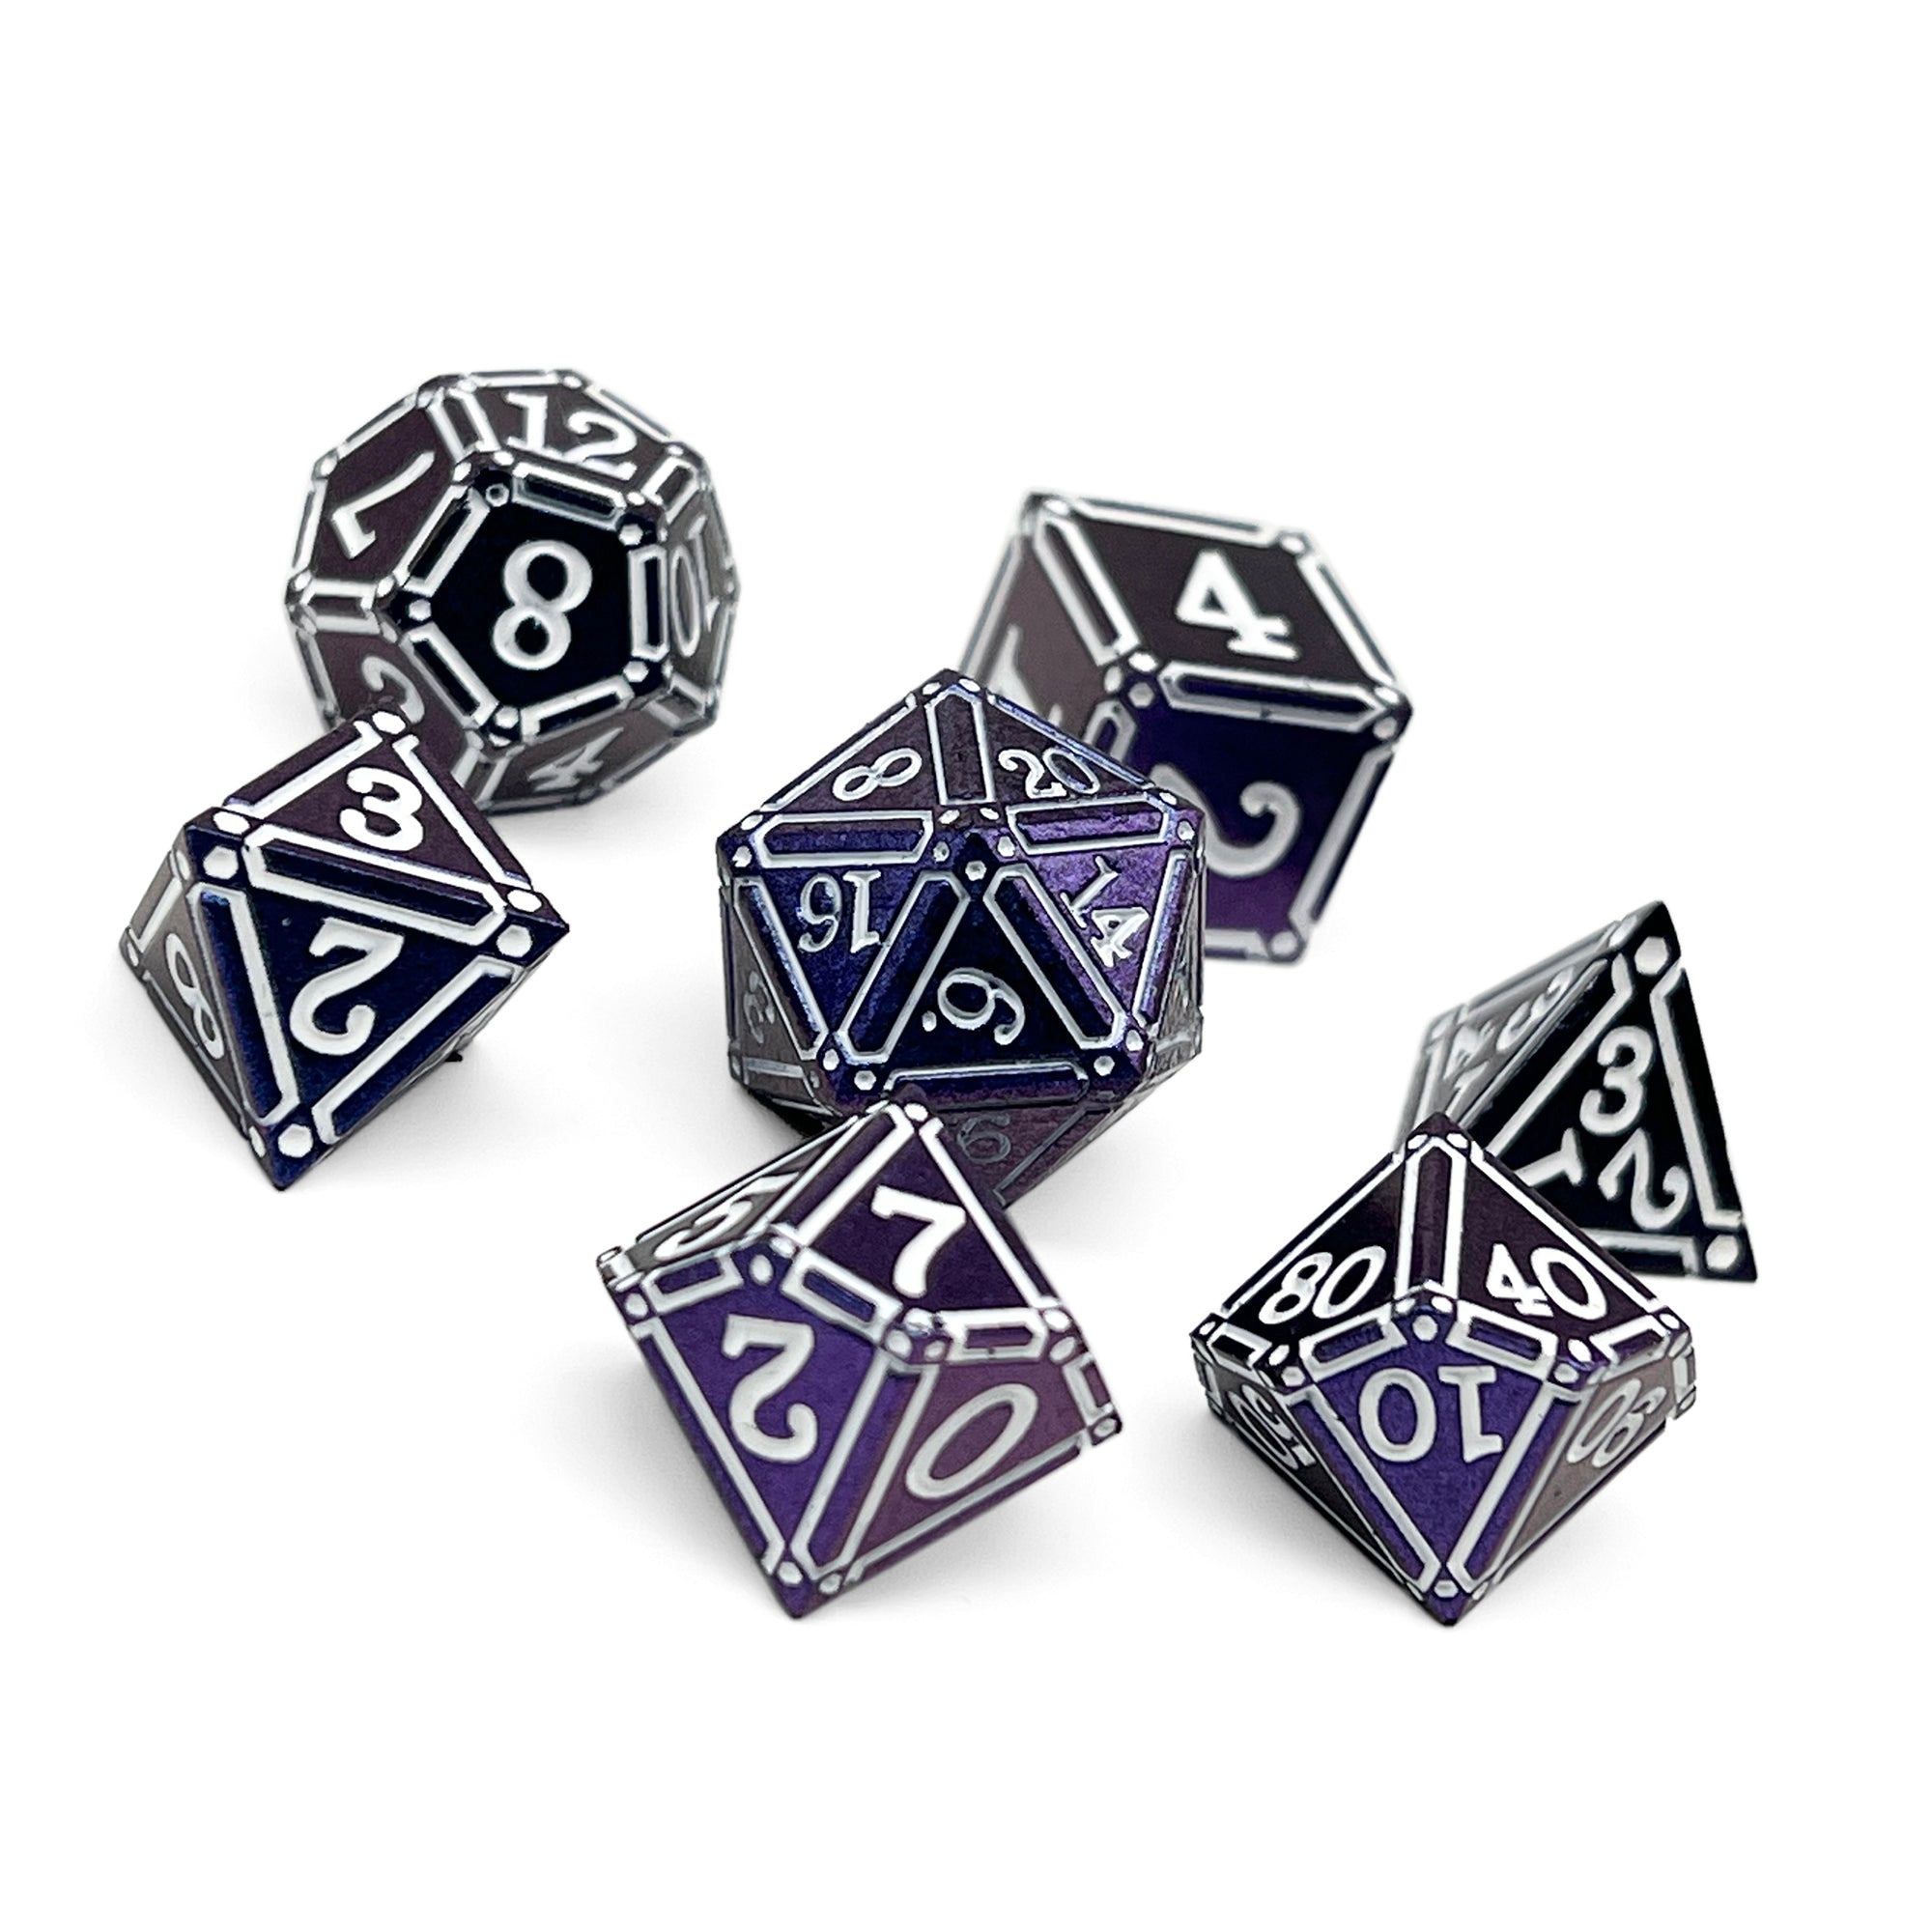 Anandice Yoga Dice Set 7 Pieces ideal for YOGA lovers Anandice